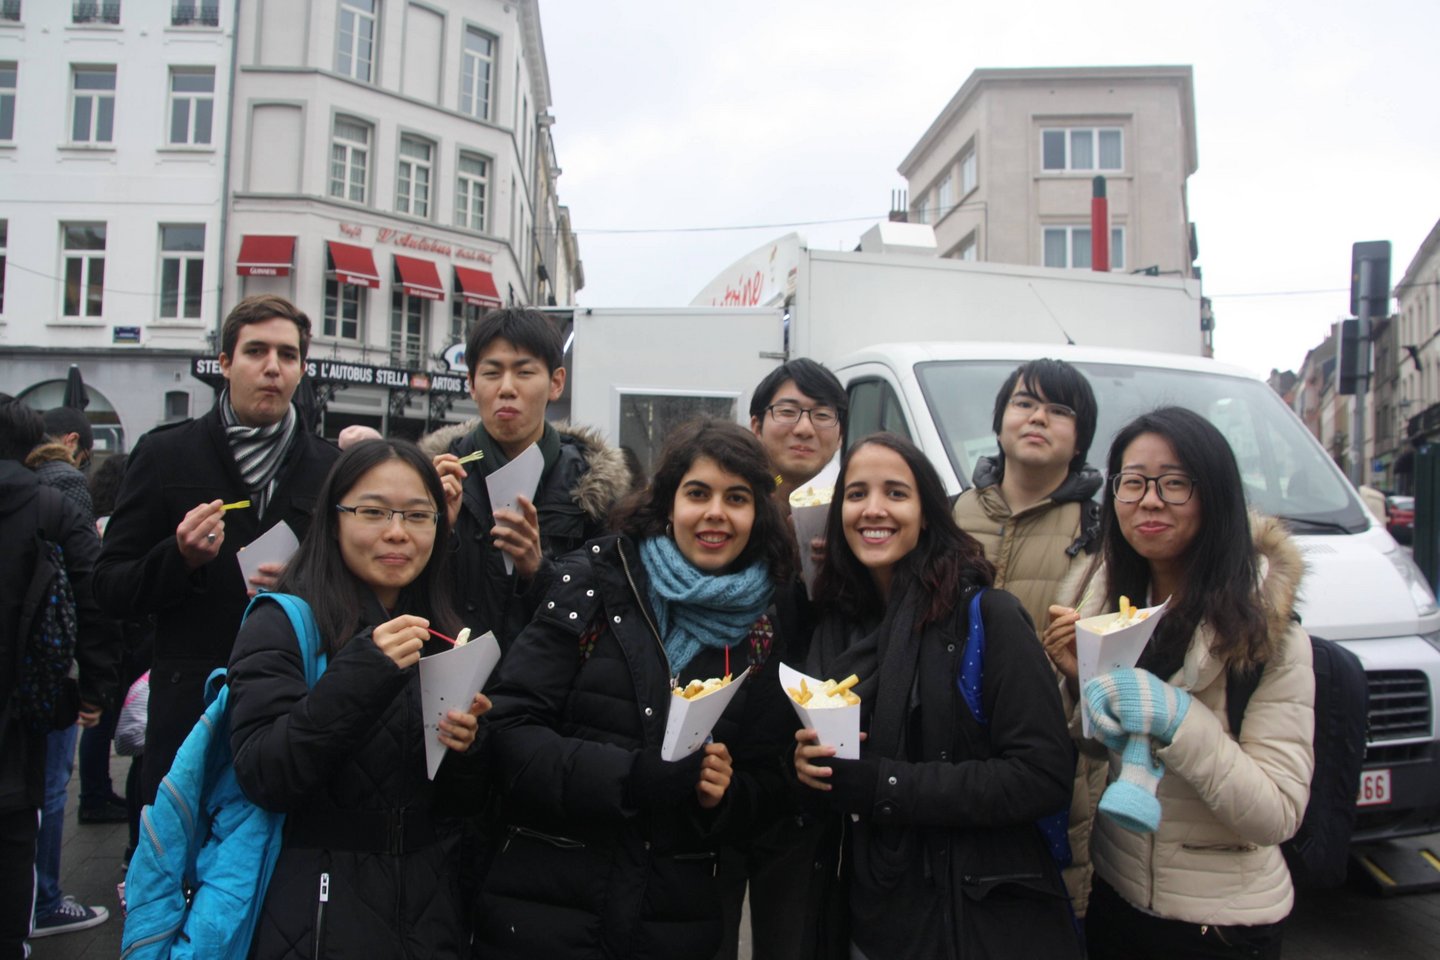 Students with bags of belgian fries in their hands